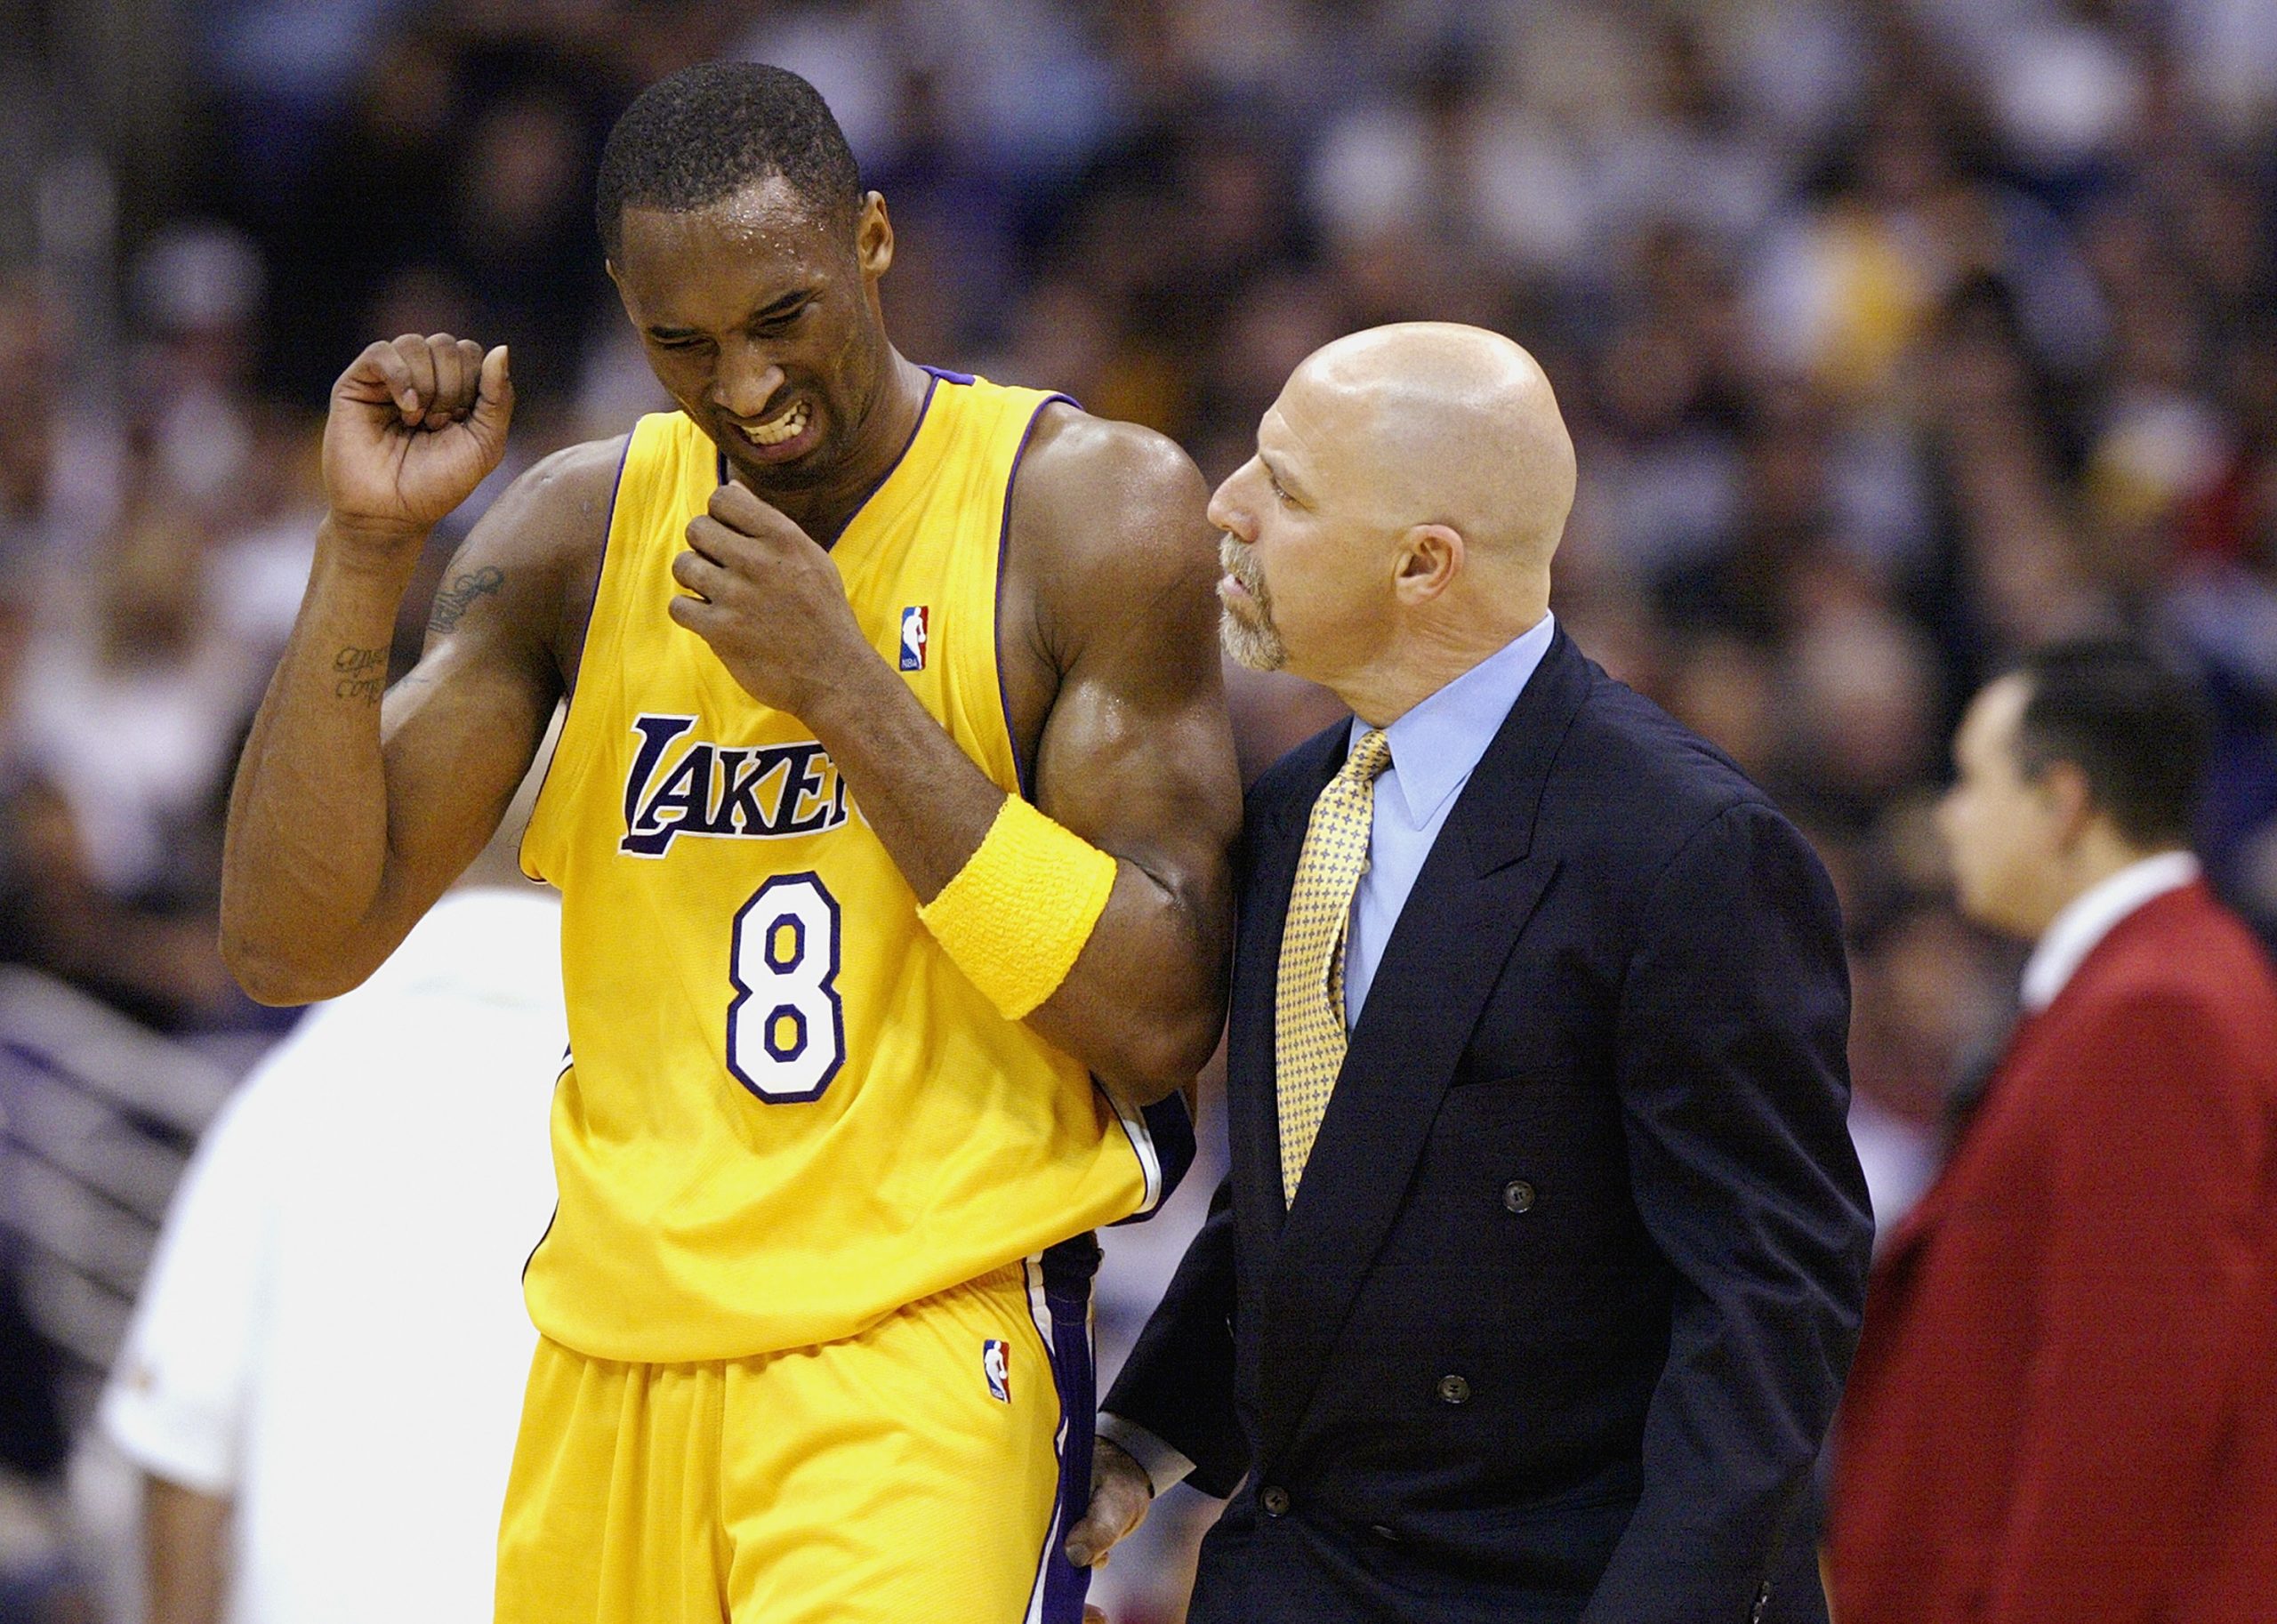 Athletic trainer Gary Vitti talks with Kobe Bryant of the Los Angeles Lakers after an injury.